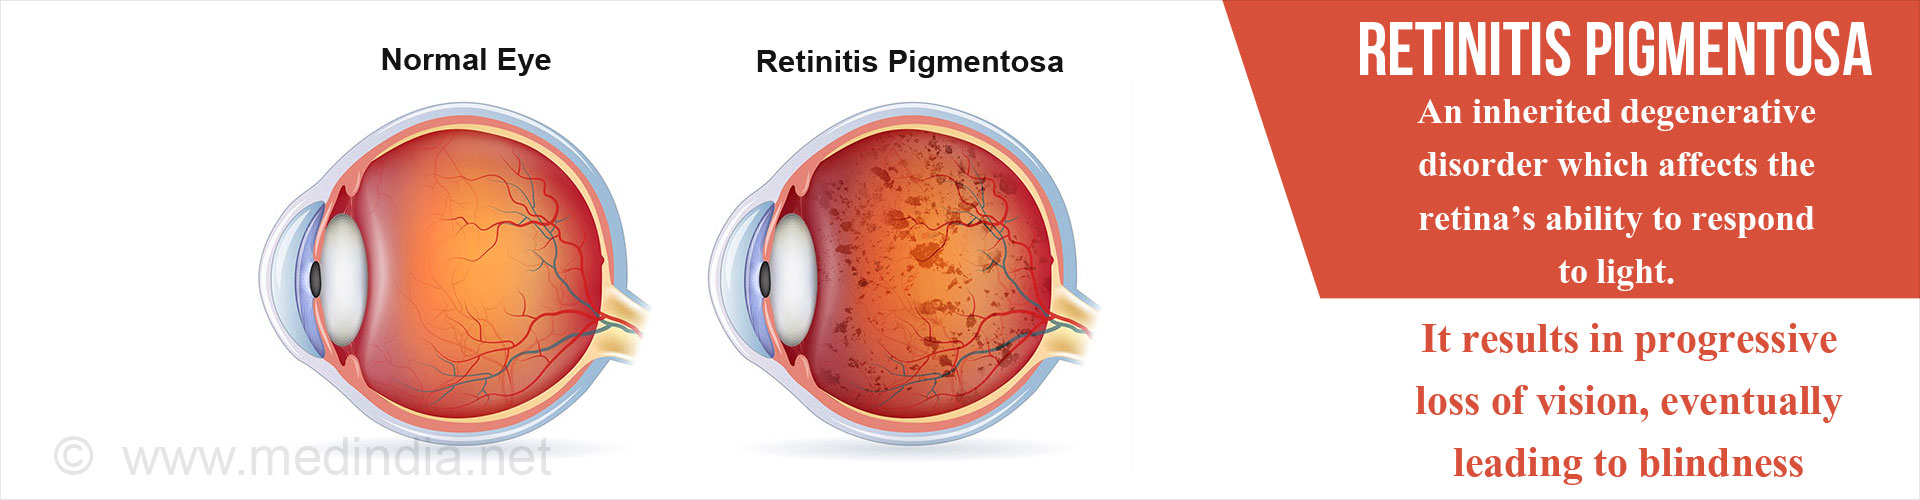 Retinitis Pigmentosa - an inherited degenerative disorder which affects the retina's ability to respond to light.

It results in progressive loss of vision, eventually leading to blindness

Noraml eye
Retinitis Pigmentosa
